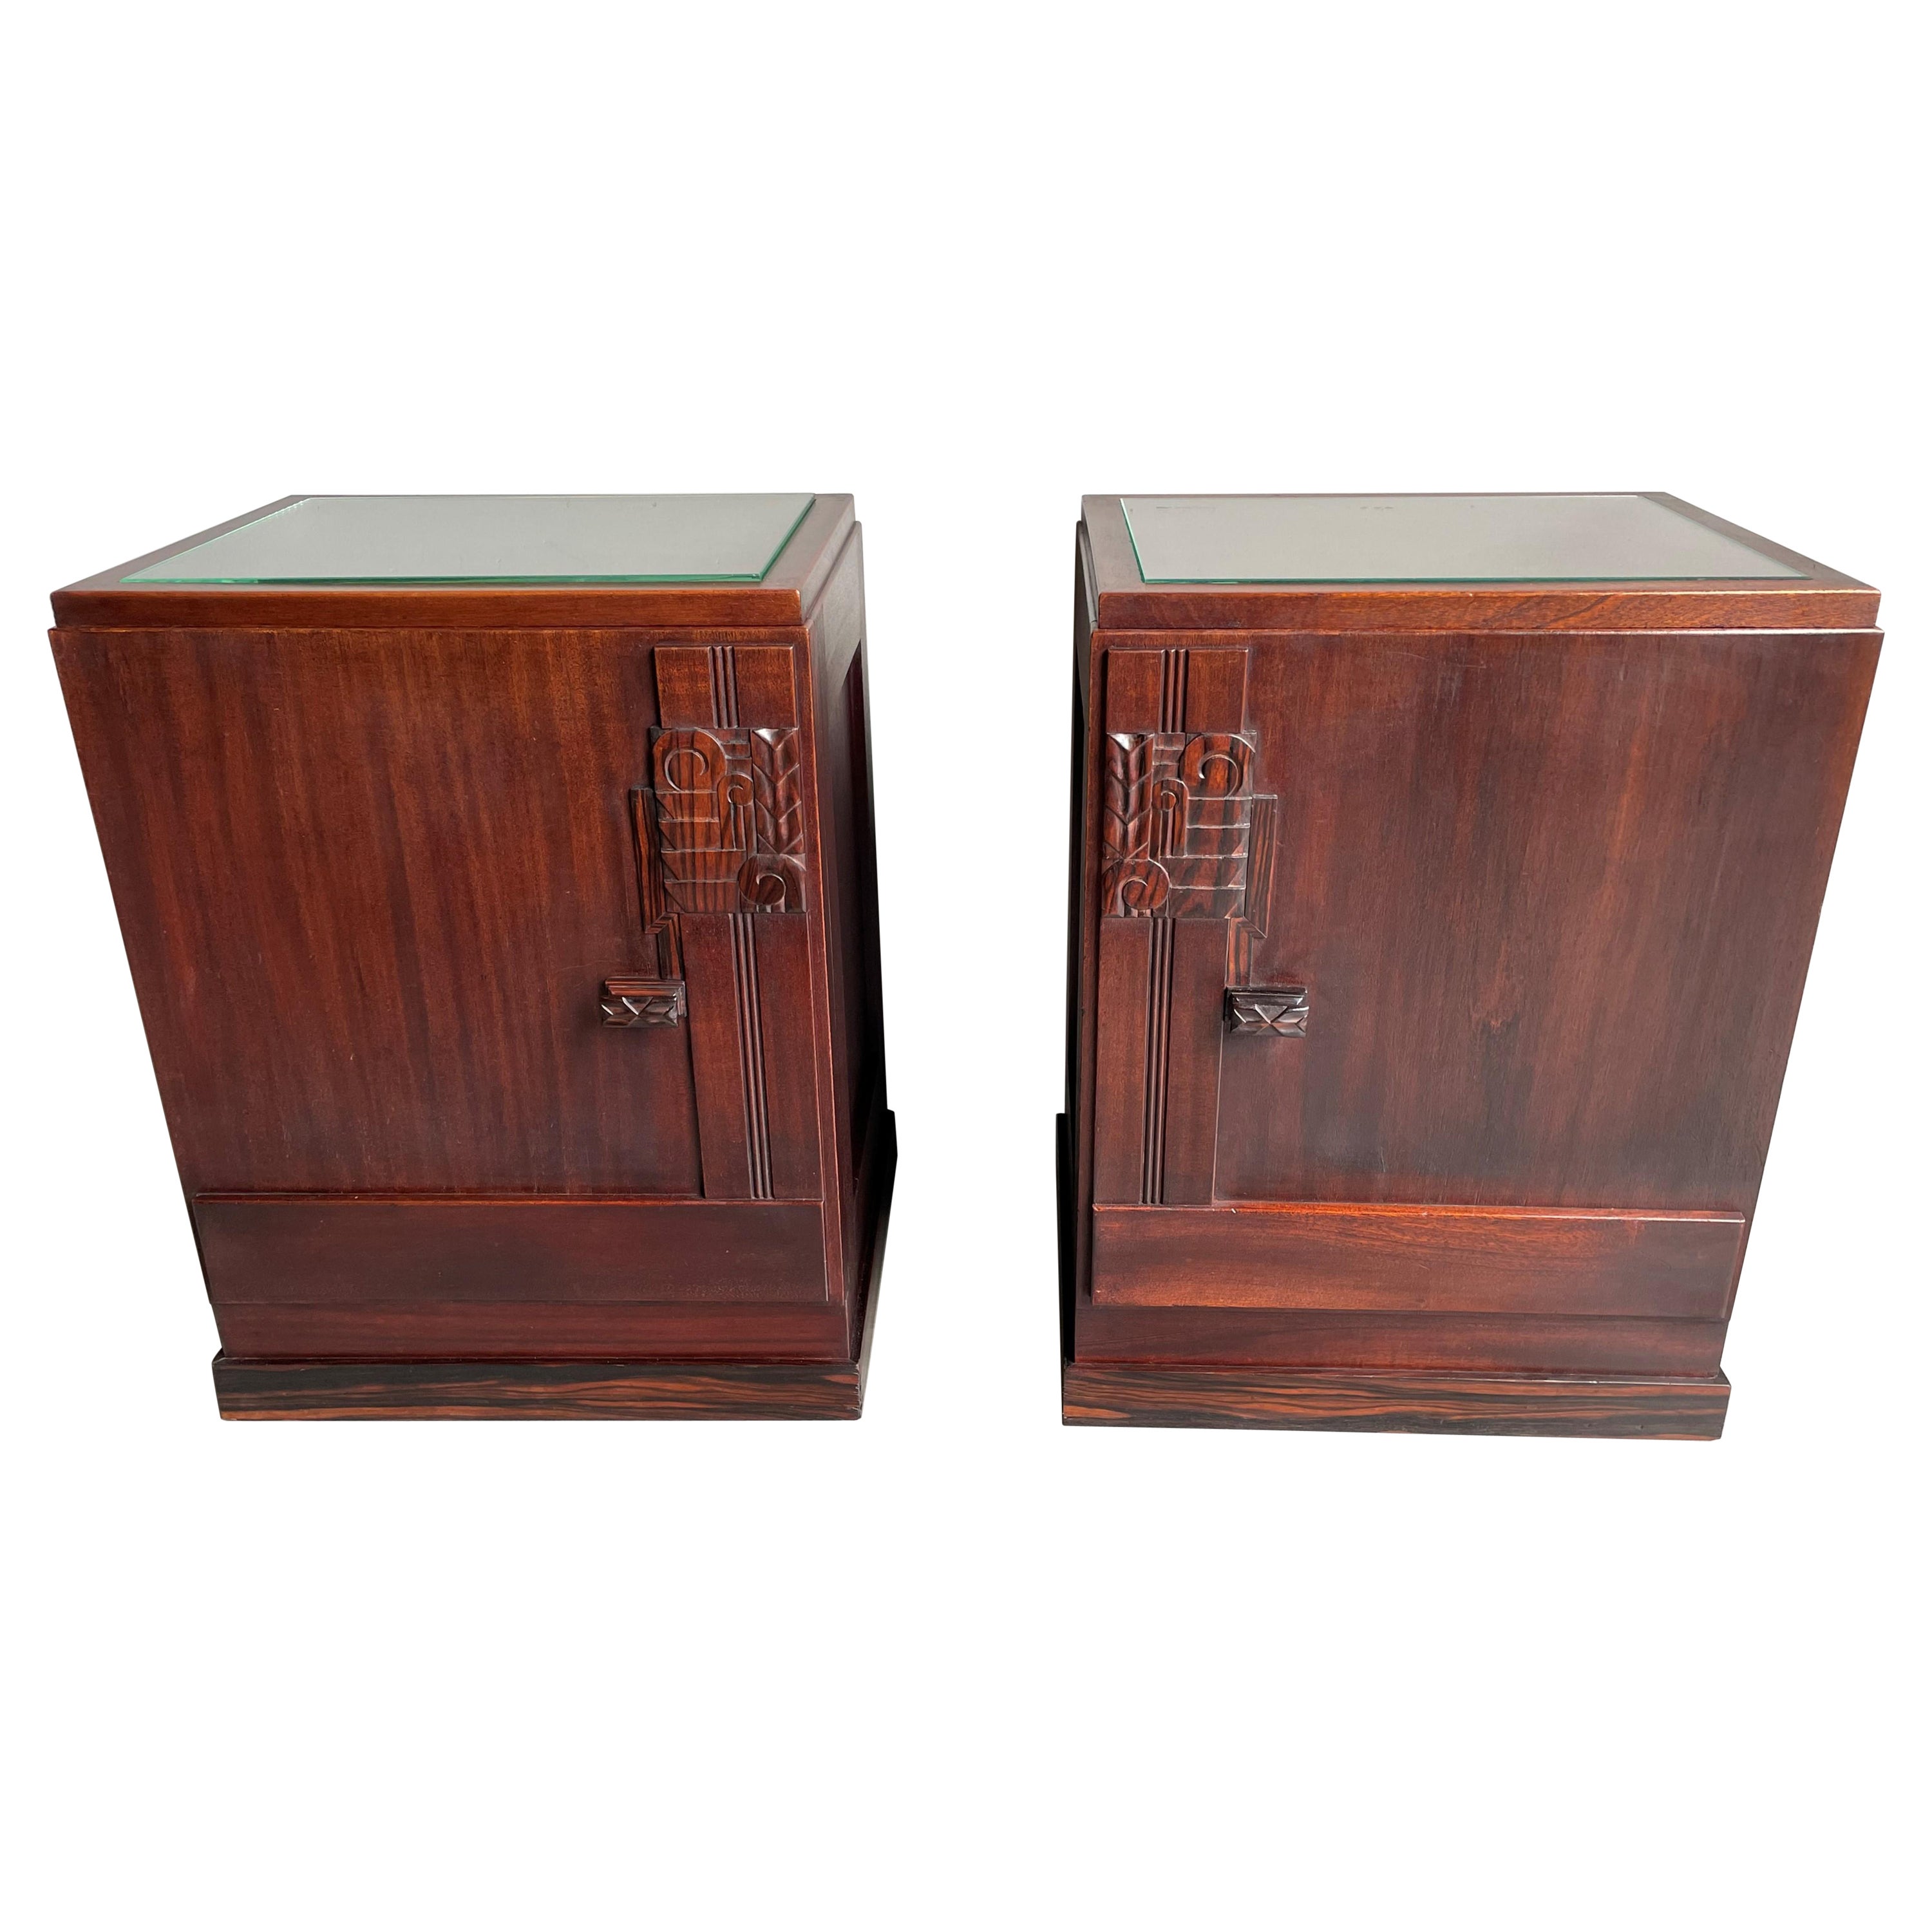 Stunning Dutch Arts and Crafts Night Stands / Bedside Tables with Drawer Inside For Sale